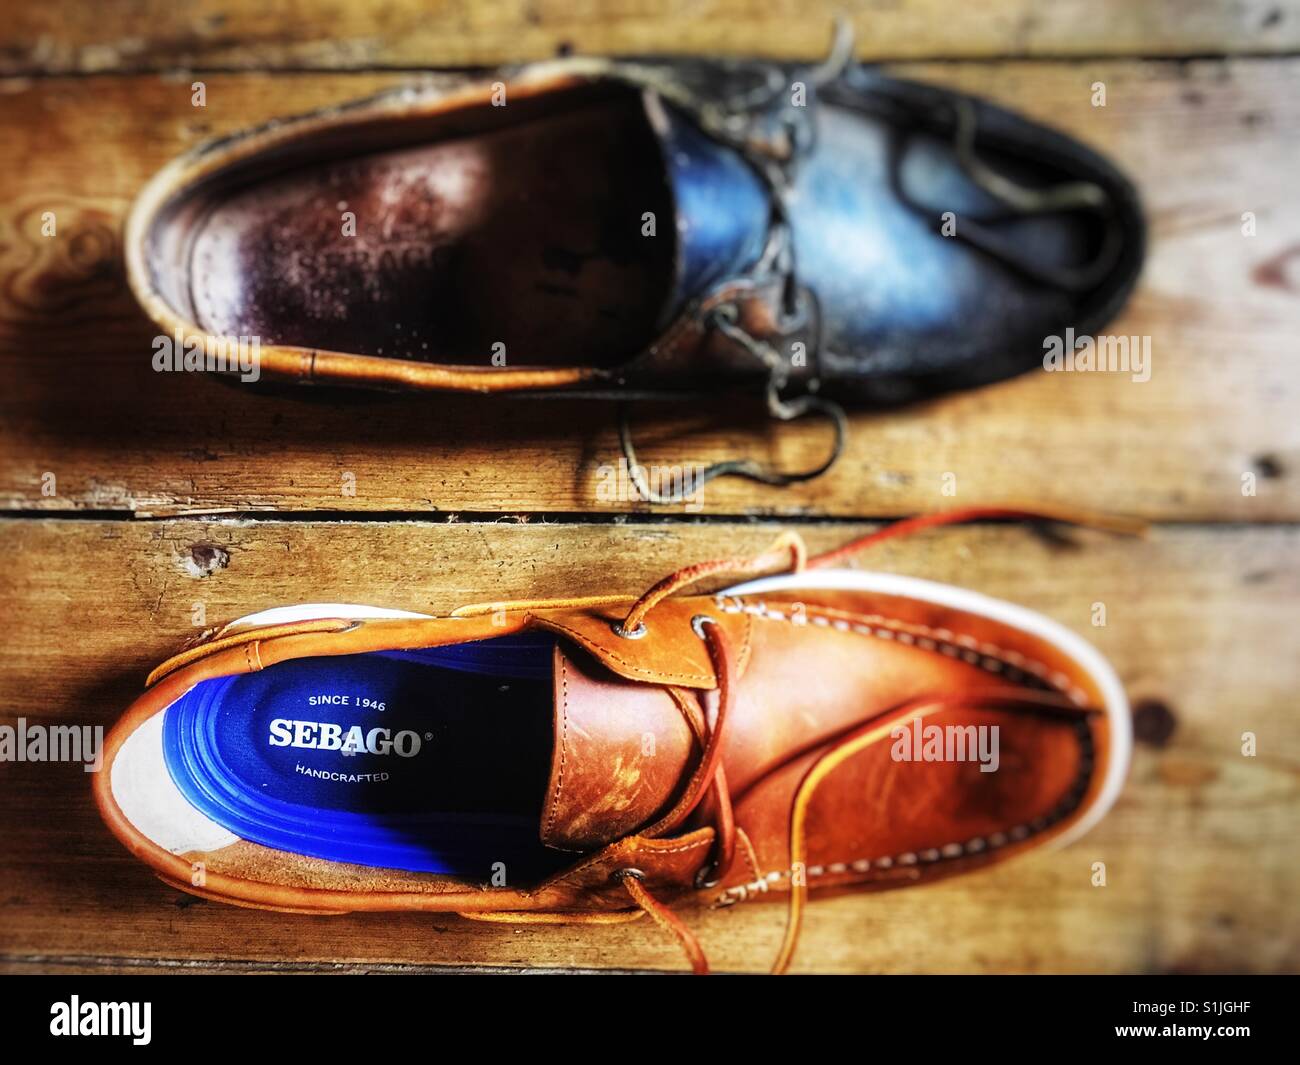 Sebago men's deck shoes (bottom shoe is new, top shoe 22 years old Stock  Photo - Alamy